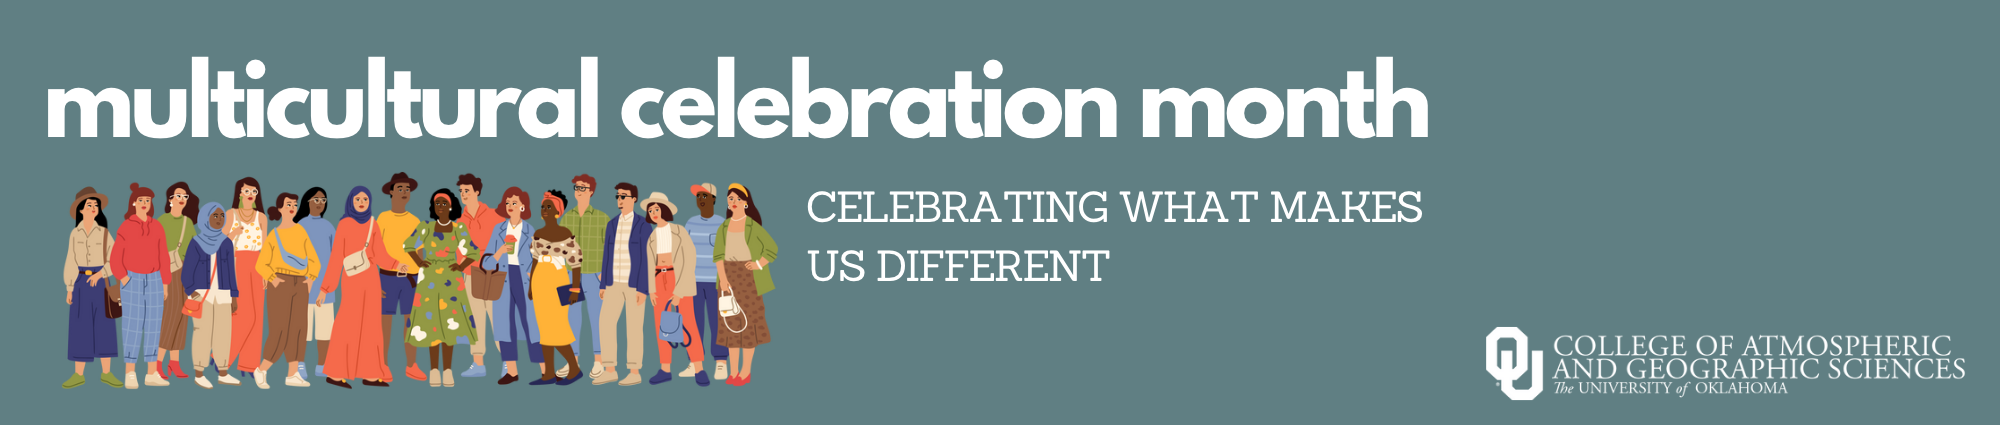 Multicultural Celebration Month " Celebrating what makes us different." OU College of Atmospheric & Geographic Sciences